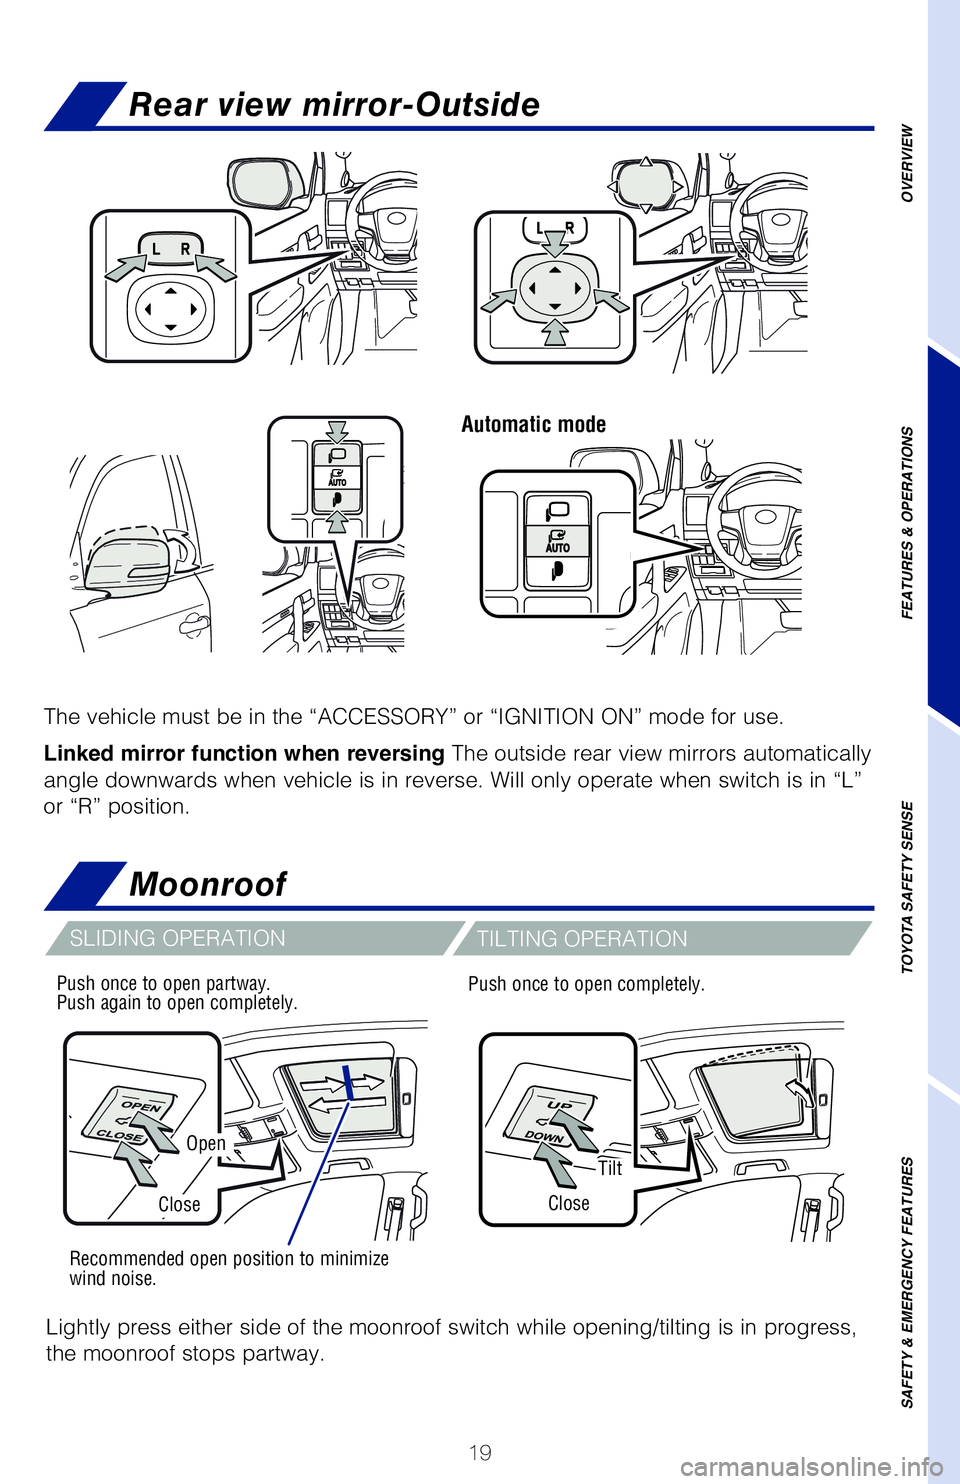 TOYOTA LAND CRUISER 2021  Owners Manual (in English) 19
Moonroof
Automatic mode
Open
Tilt
CloseClose
Recommended open position to minimize 
wind noise.
Push once to open partway. 
Push again to open completely.
The vehicle must be in the “ACCESSORY”